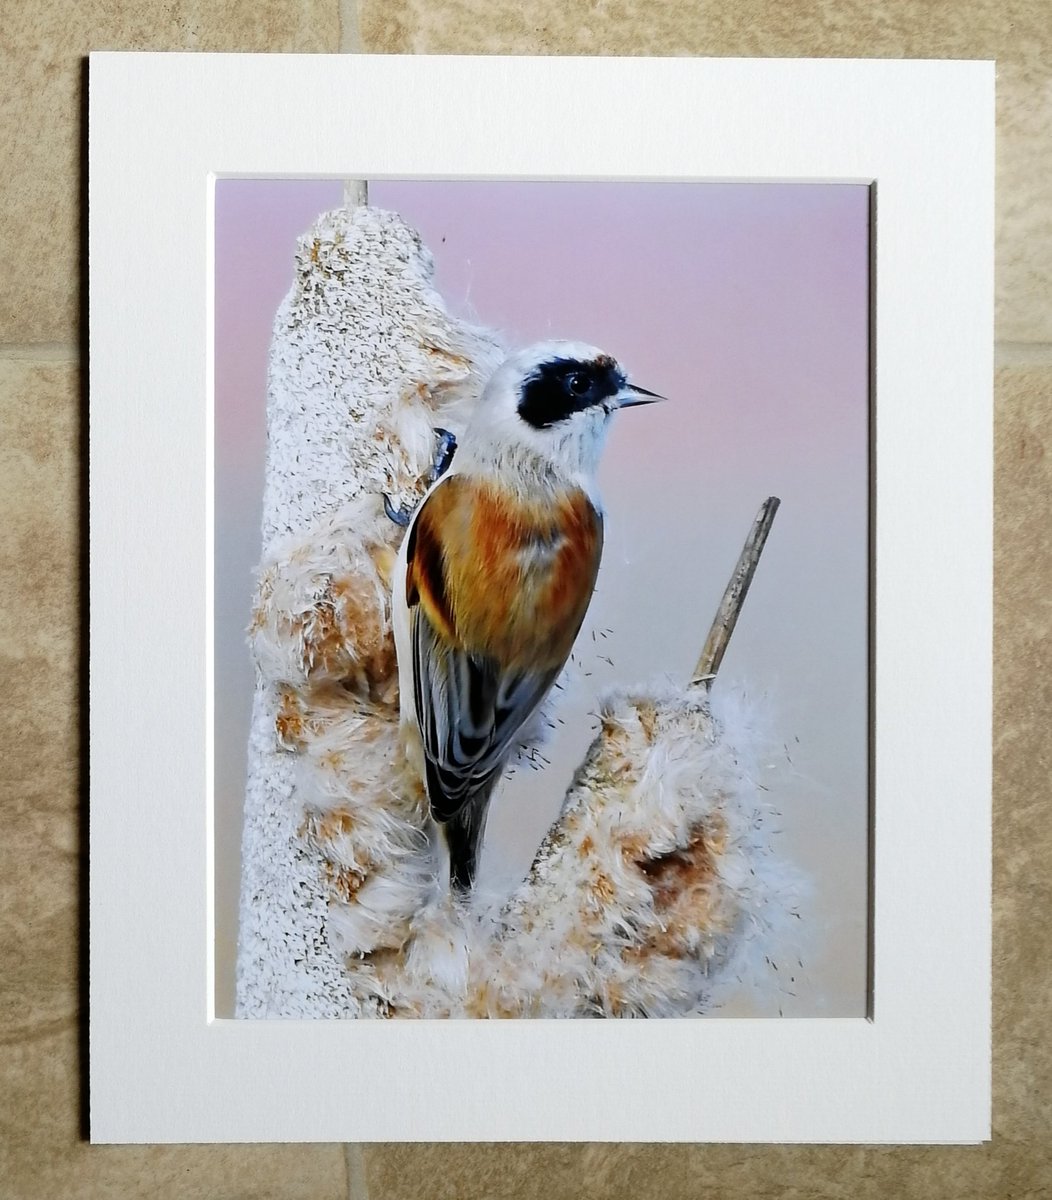 'Penduline Tit in the pink' 10x8 mounted print.  Only taken last week, and already available in my print collection.  You can buy it here; https://www.carlbovis.com/product-page/penduline-tit-in-the-pink-10x8-mounted-print 